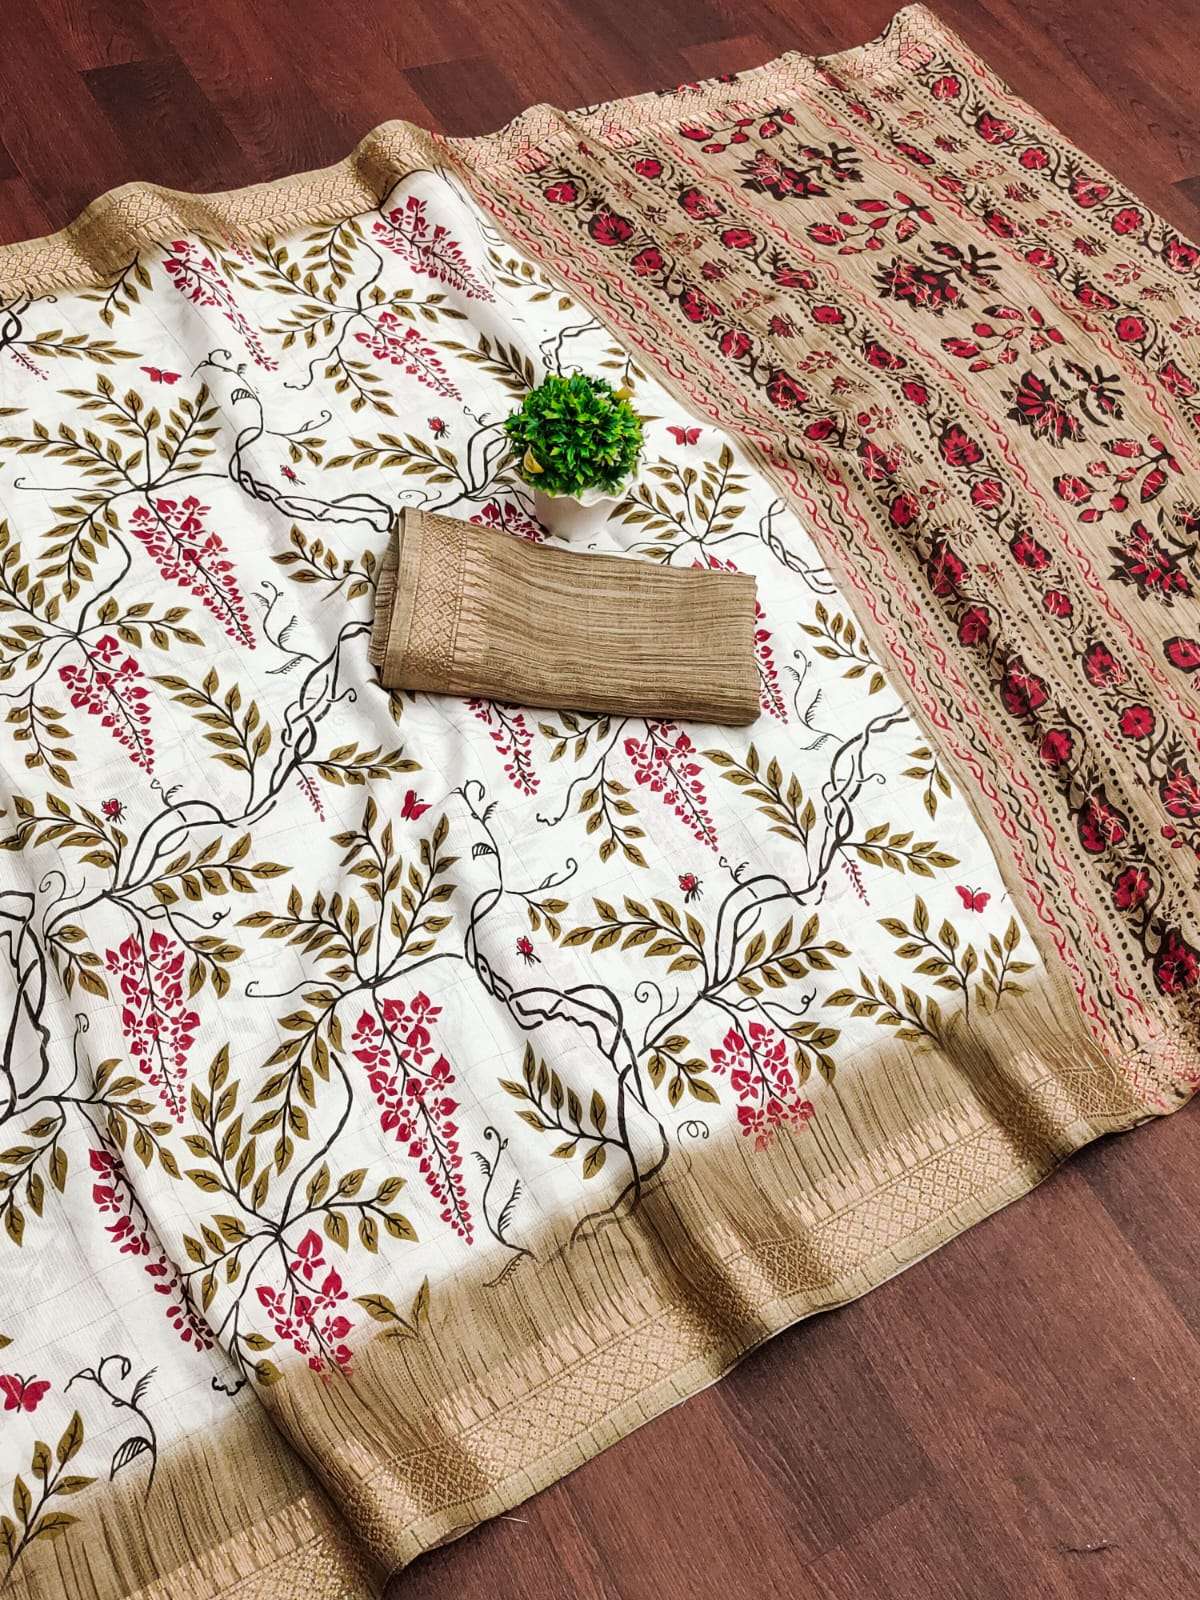 SUMMER SPECIAL COTTON WITH FLOWER PRINTED SAREE